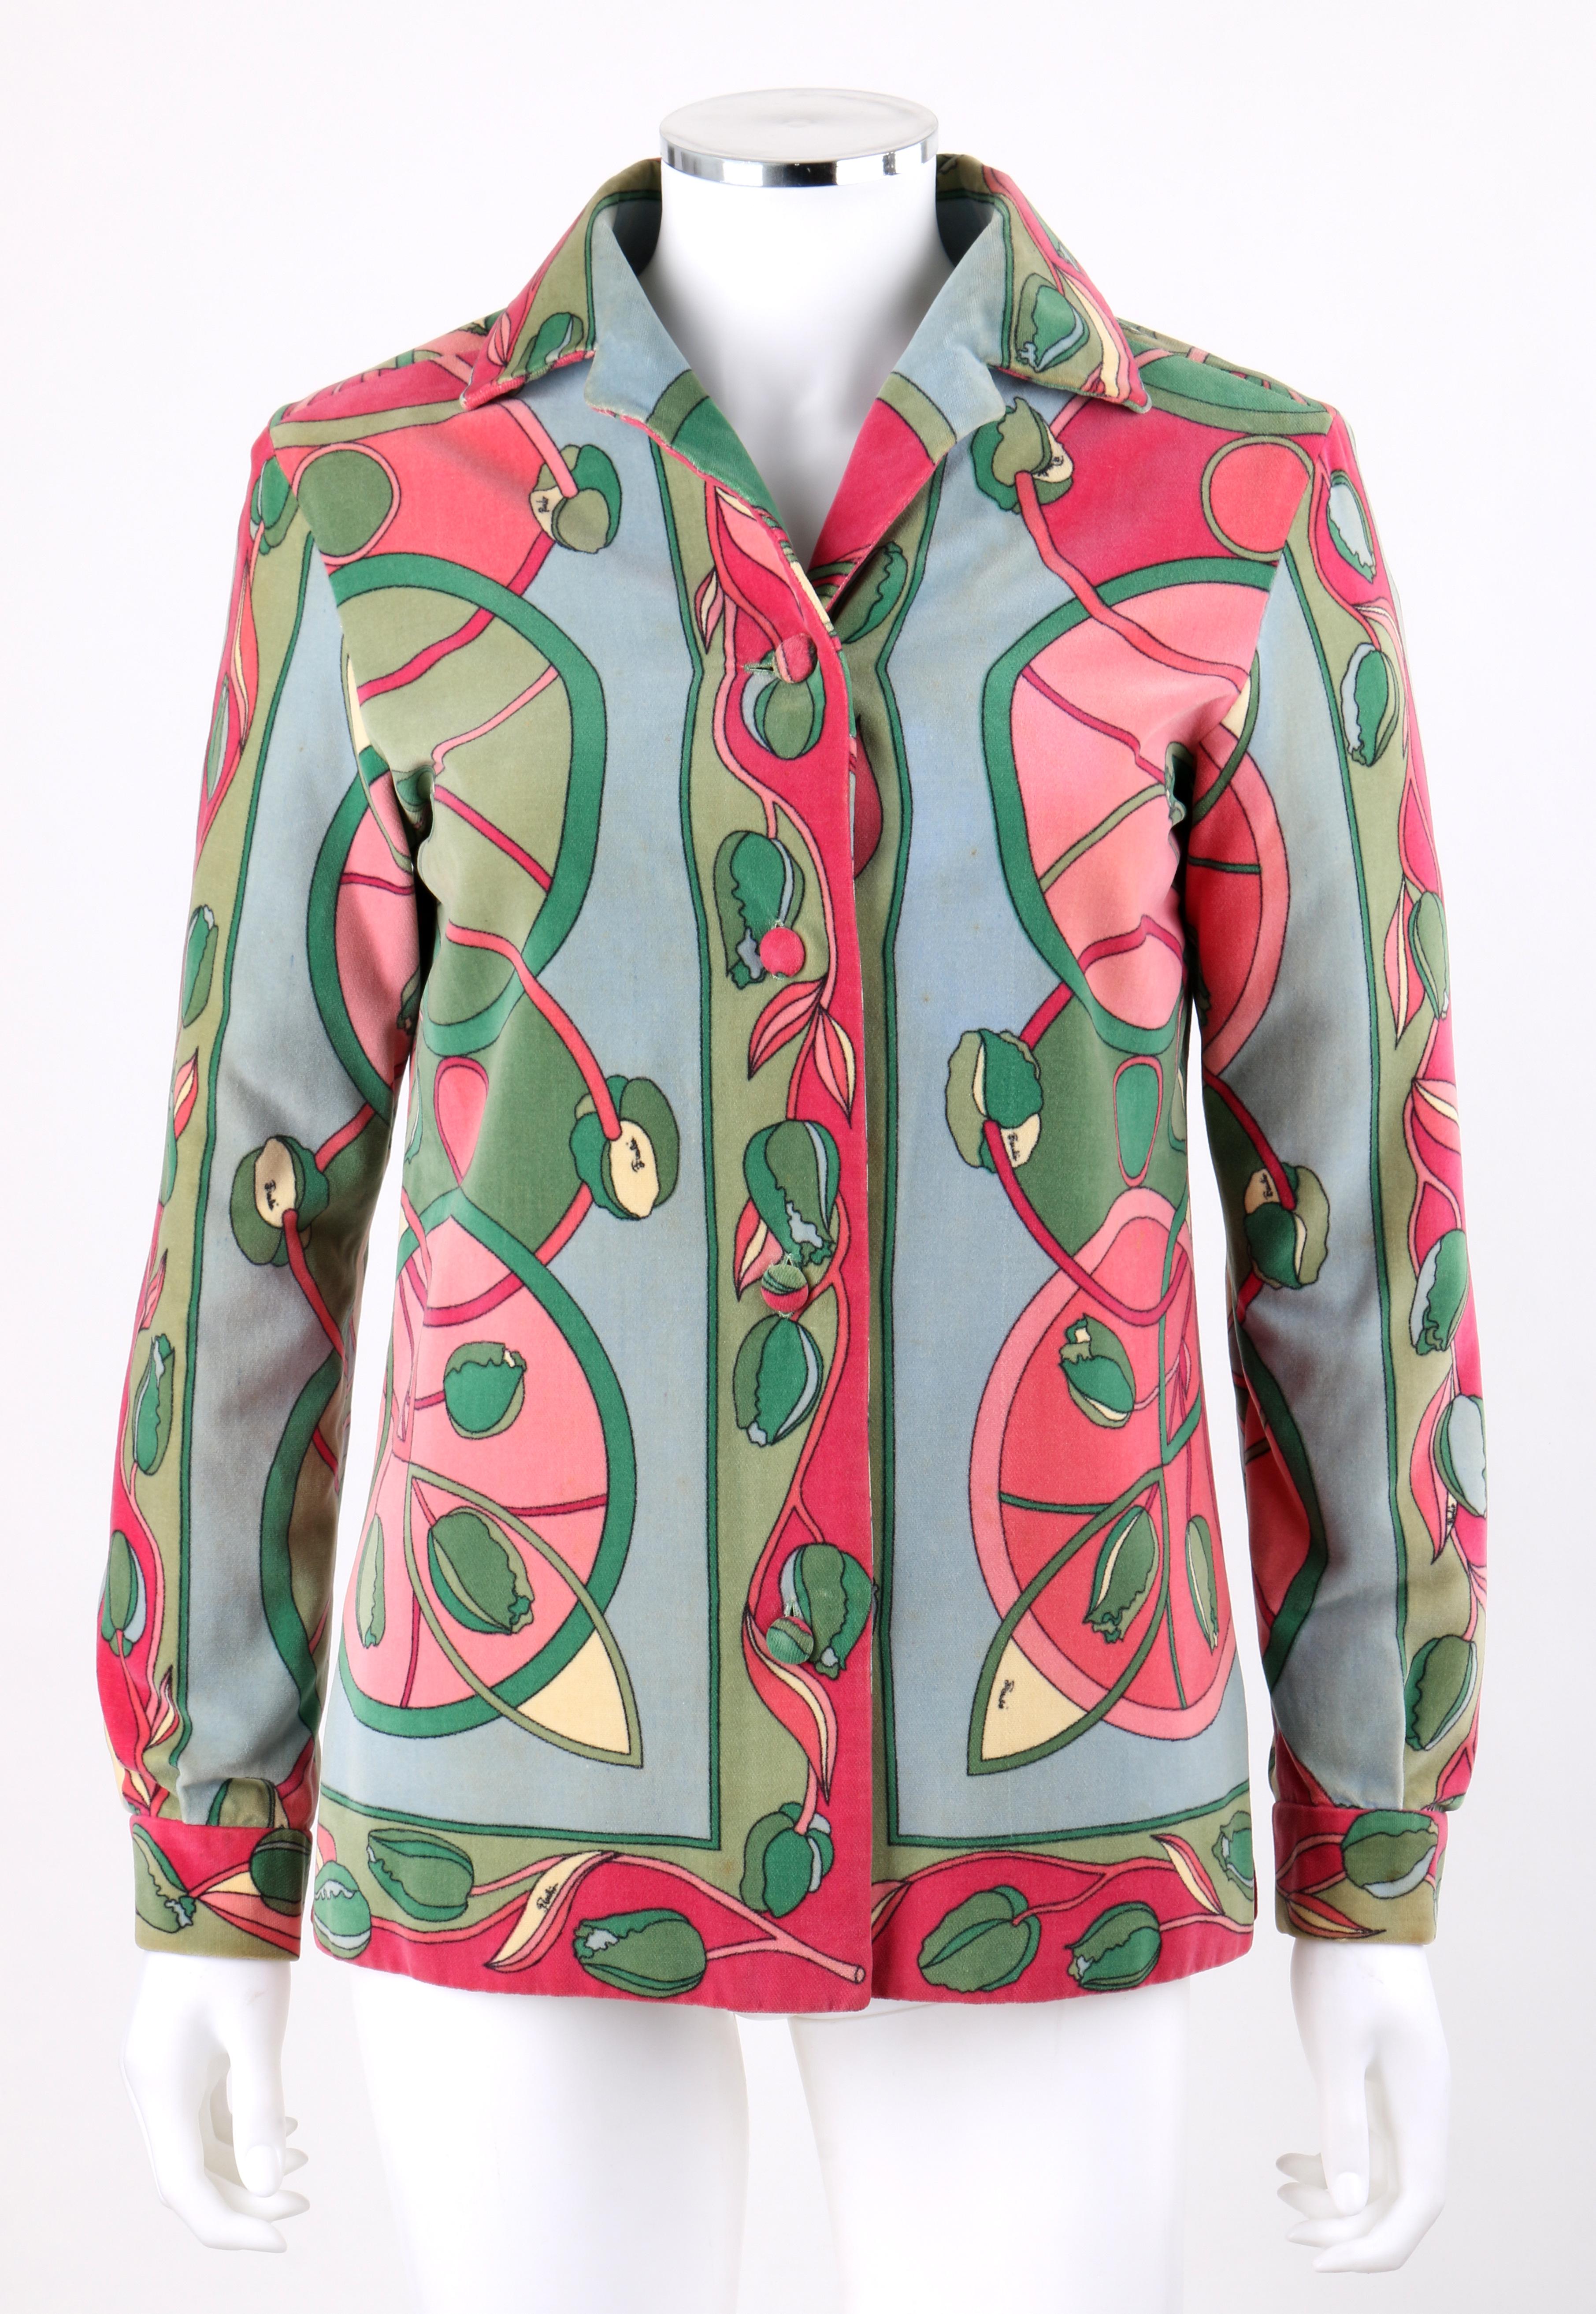 EMILIO PUCCI c.1960’s Multicolor Tulip Floral Velvet Button Front Jacket
 
Circa: 1960’s
Label(s): Emilio Pucci   
Style: Jacket
Color(s): Shades of blue, green, pink and yellow.  
Lined: Yes
Marked Fabric Content: 100% Cotton 
Additional Details /